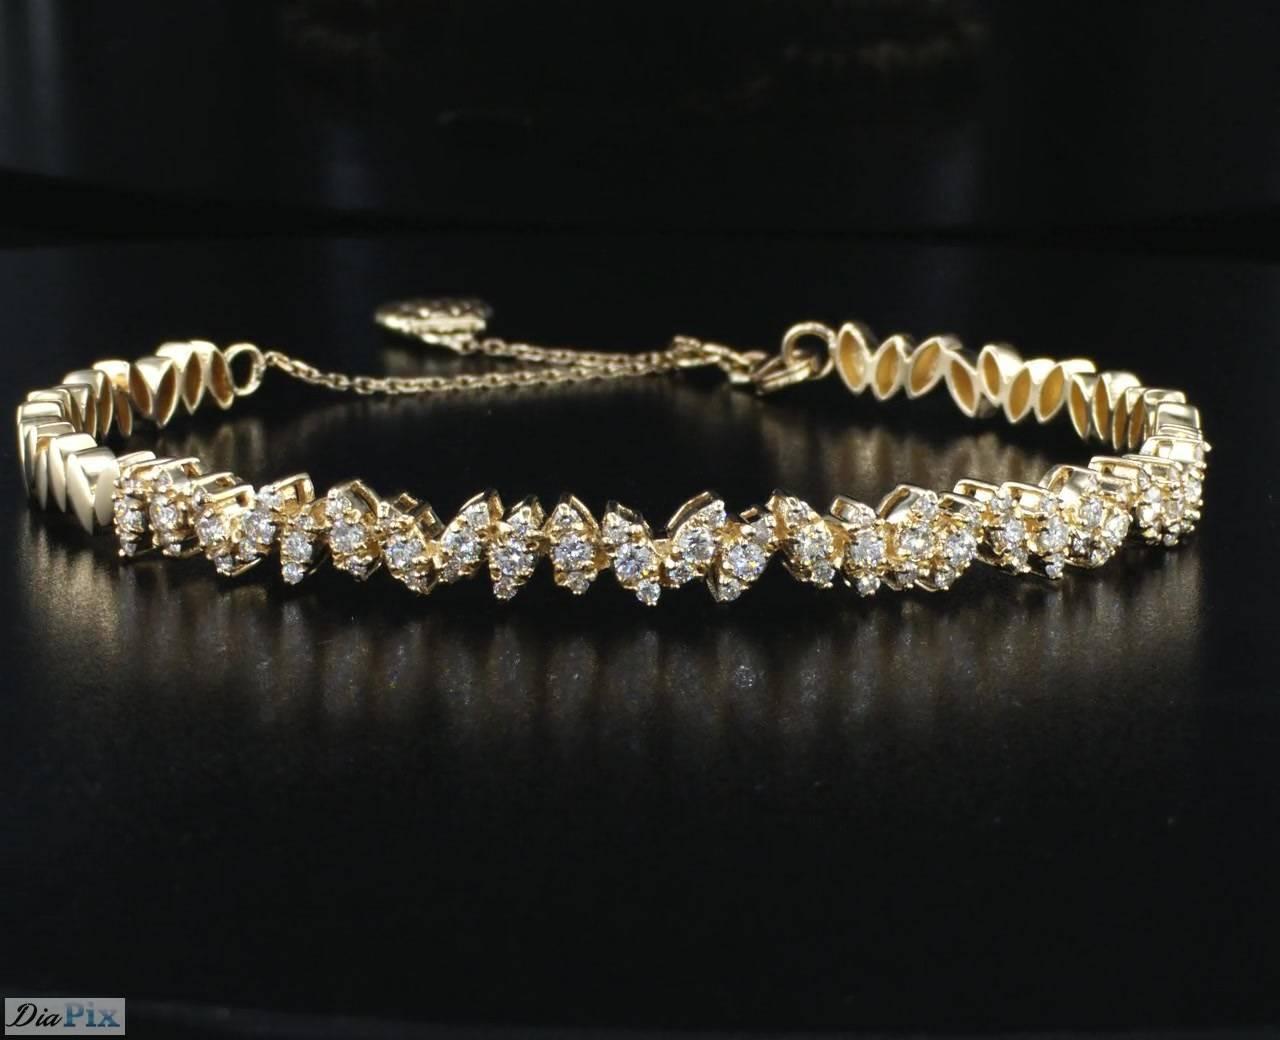 One of a kind 14K yellow gold diamond fashion bangle bracelet. This leaf motif bracelet is done with precise craftsmanship and fits an everyday look as well as a classic evening look. Each leaf is set with 3 round diamonds next to each other which